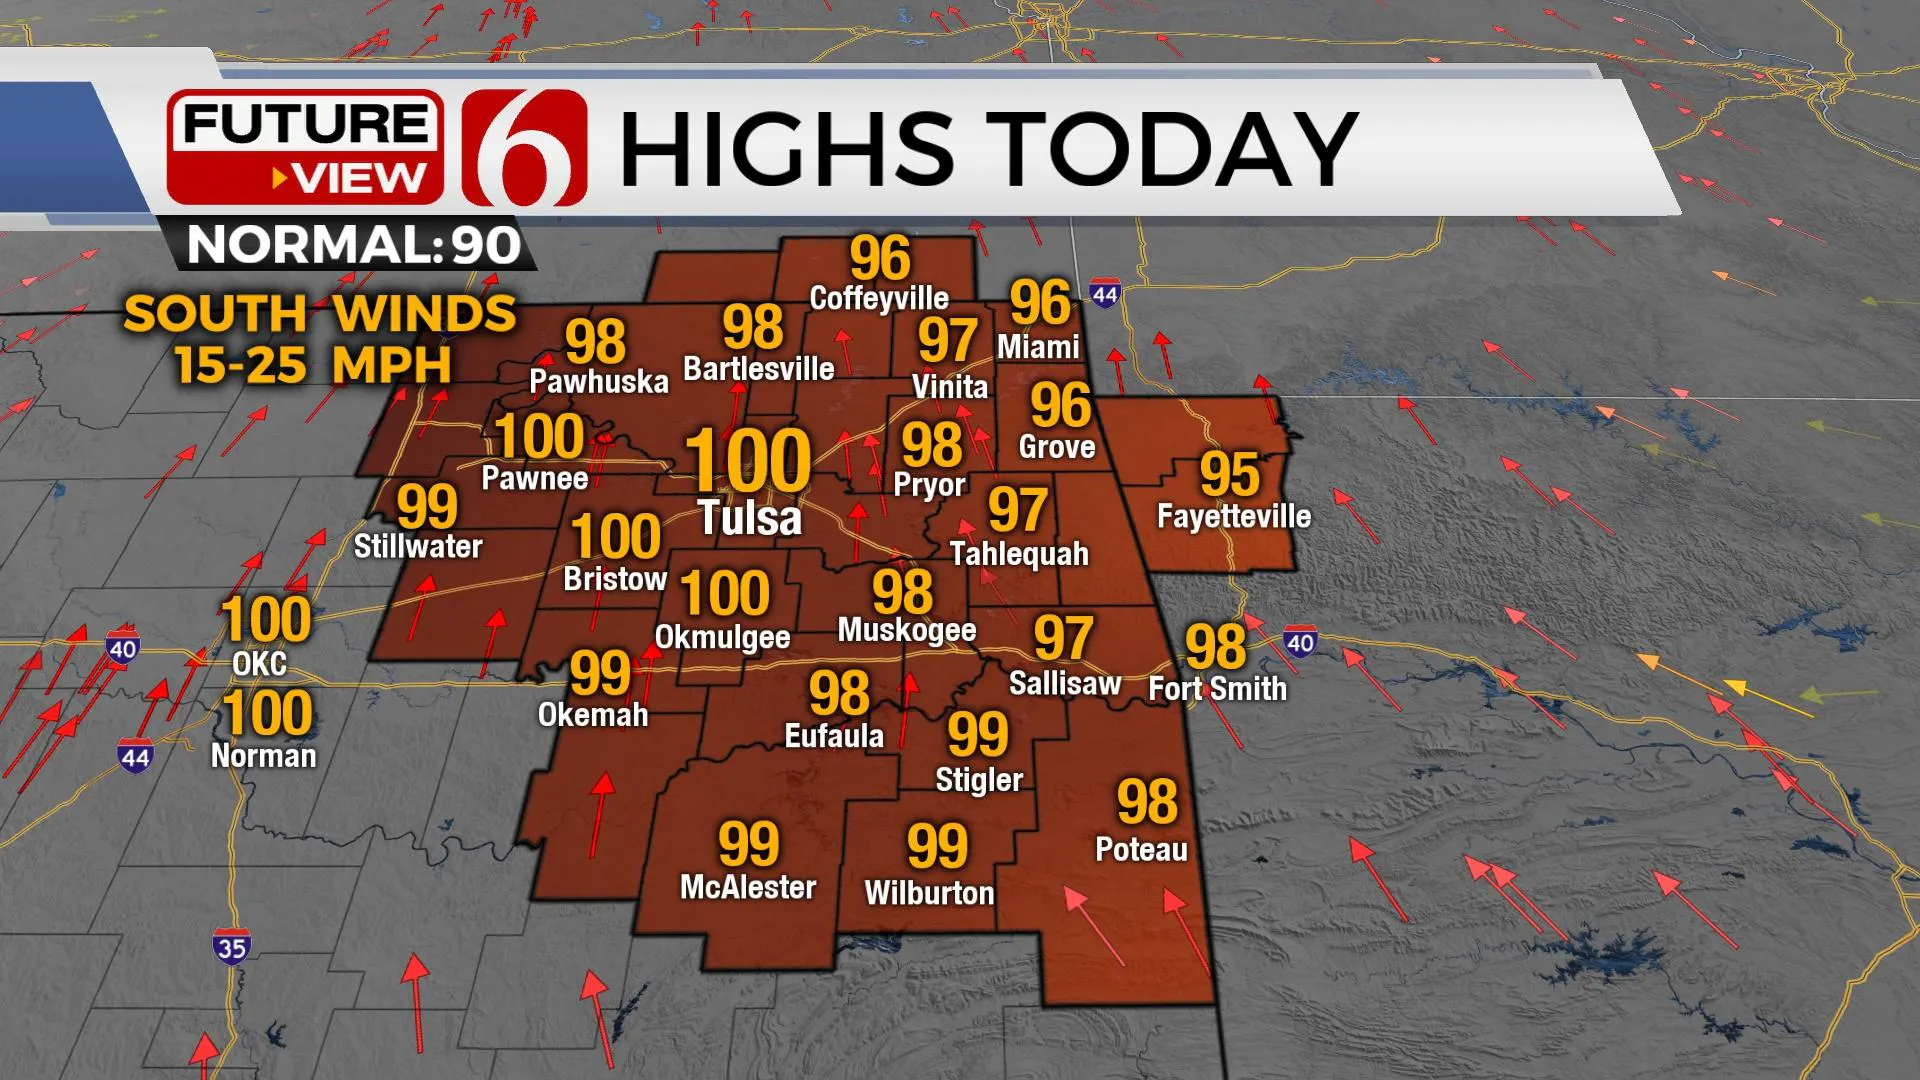 HIGHS TODAY 